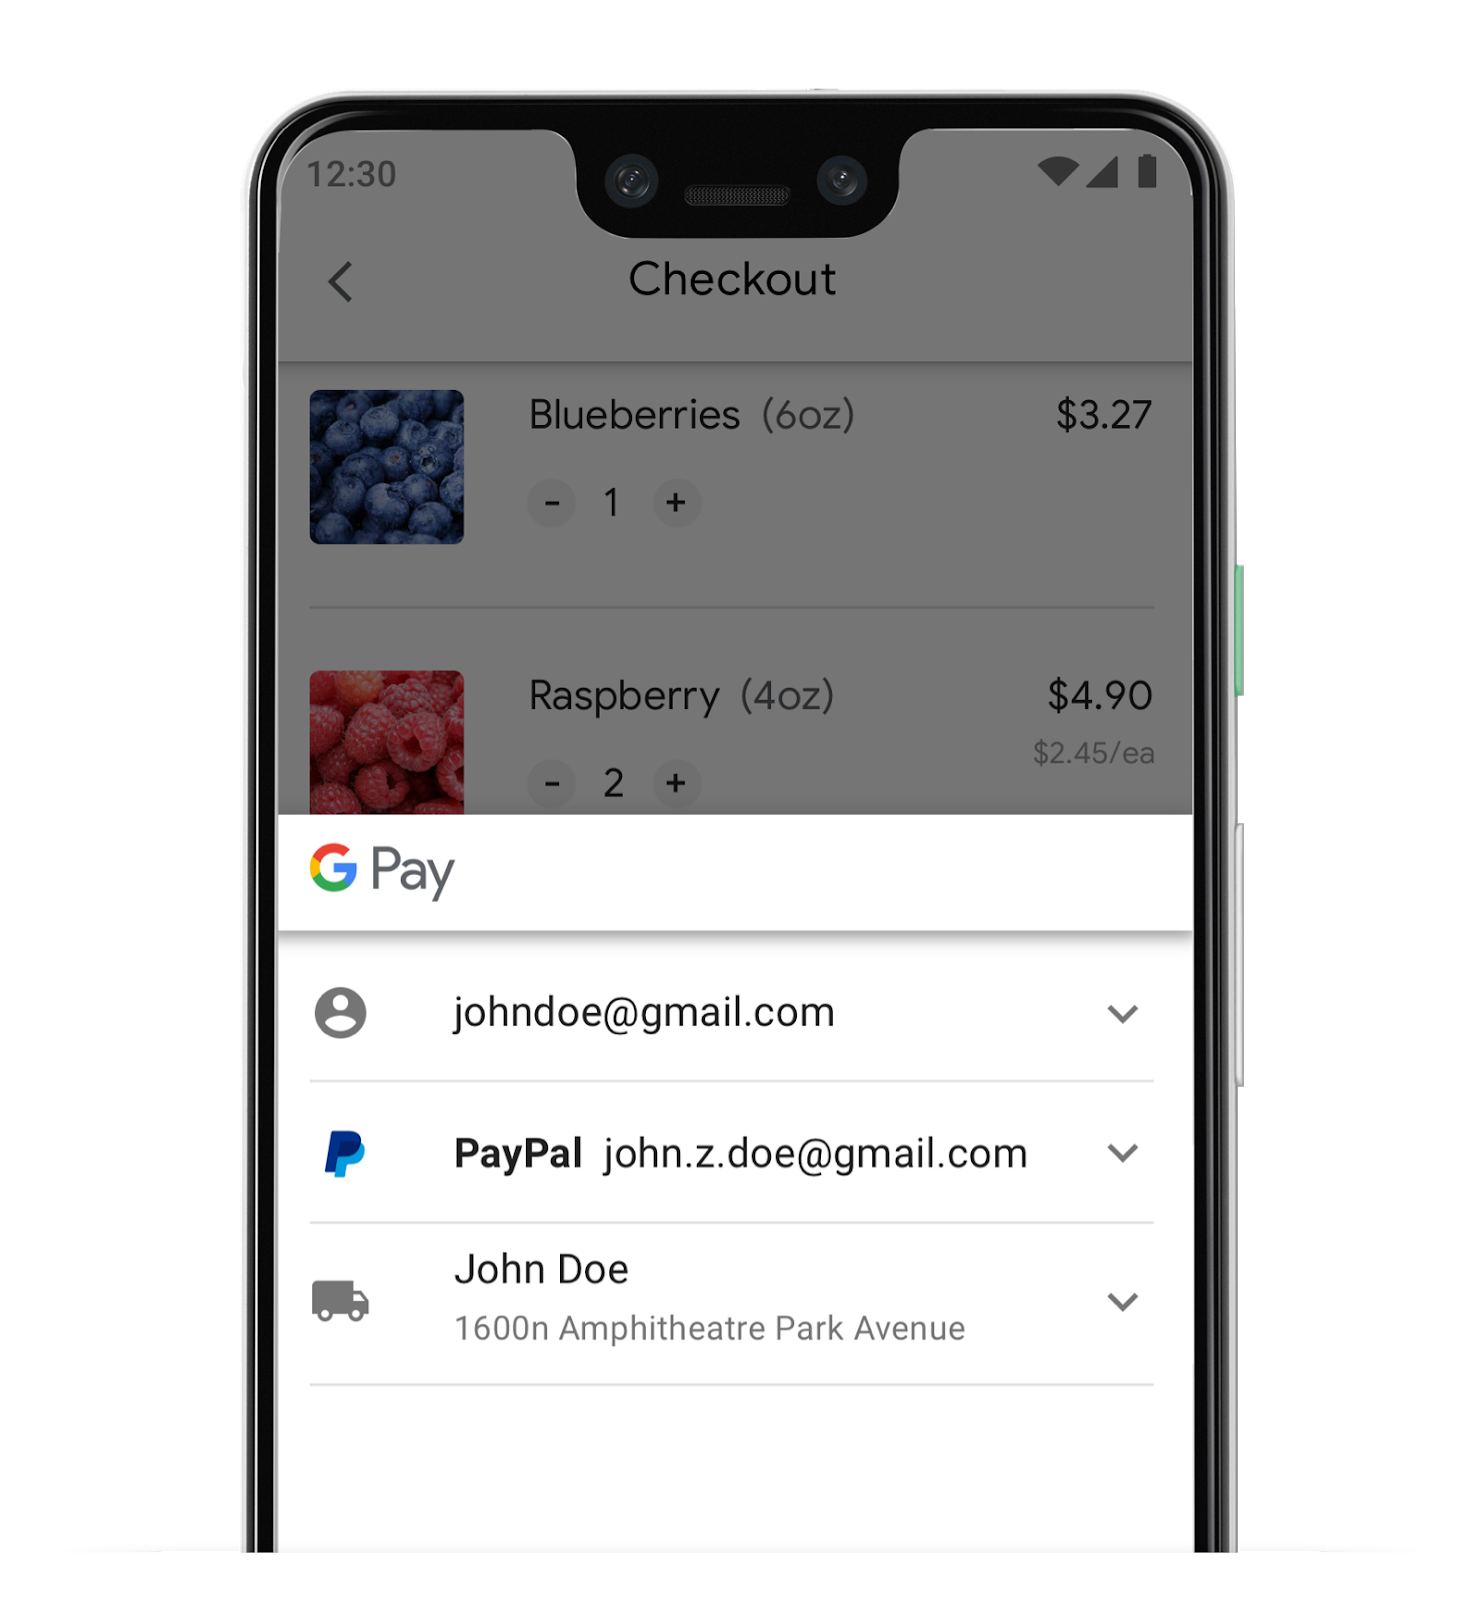 PayPal integration into Google Pay, Source: Google, 2019